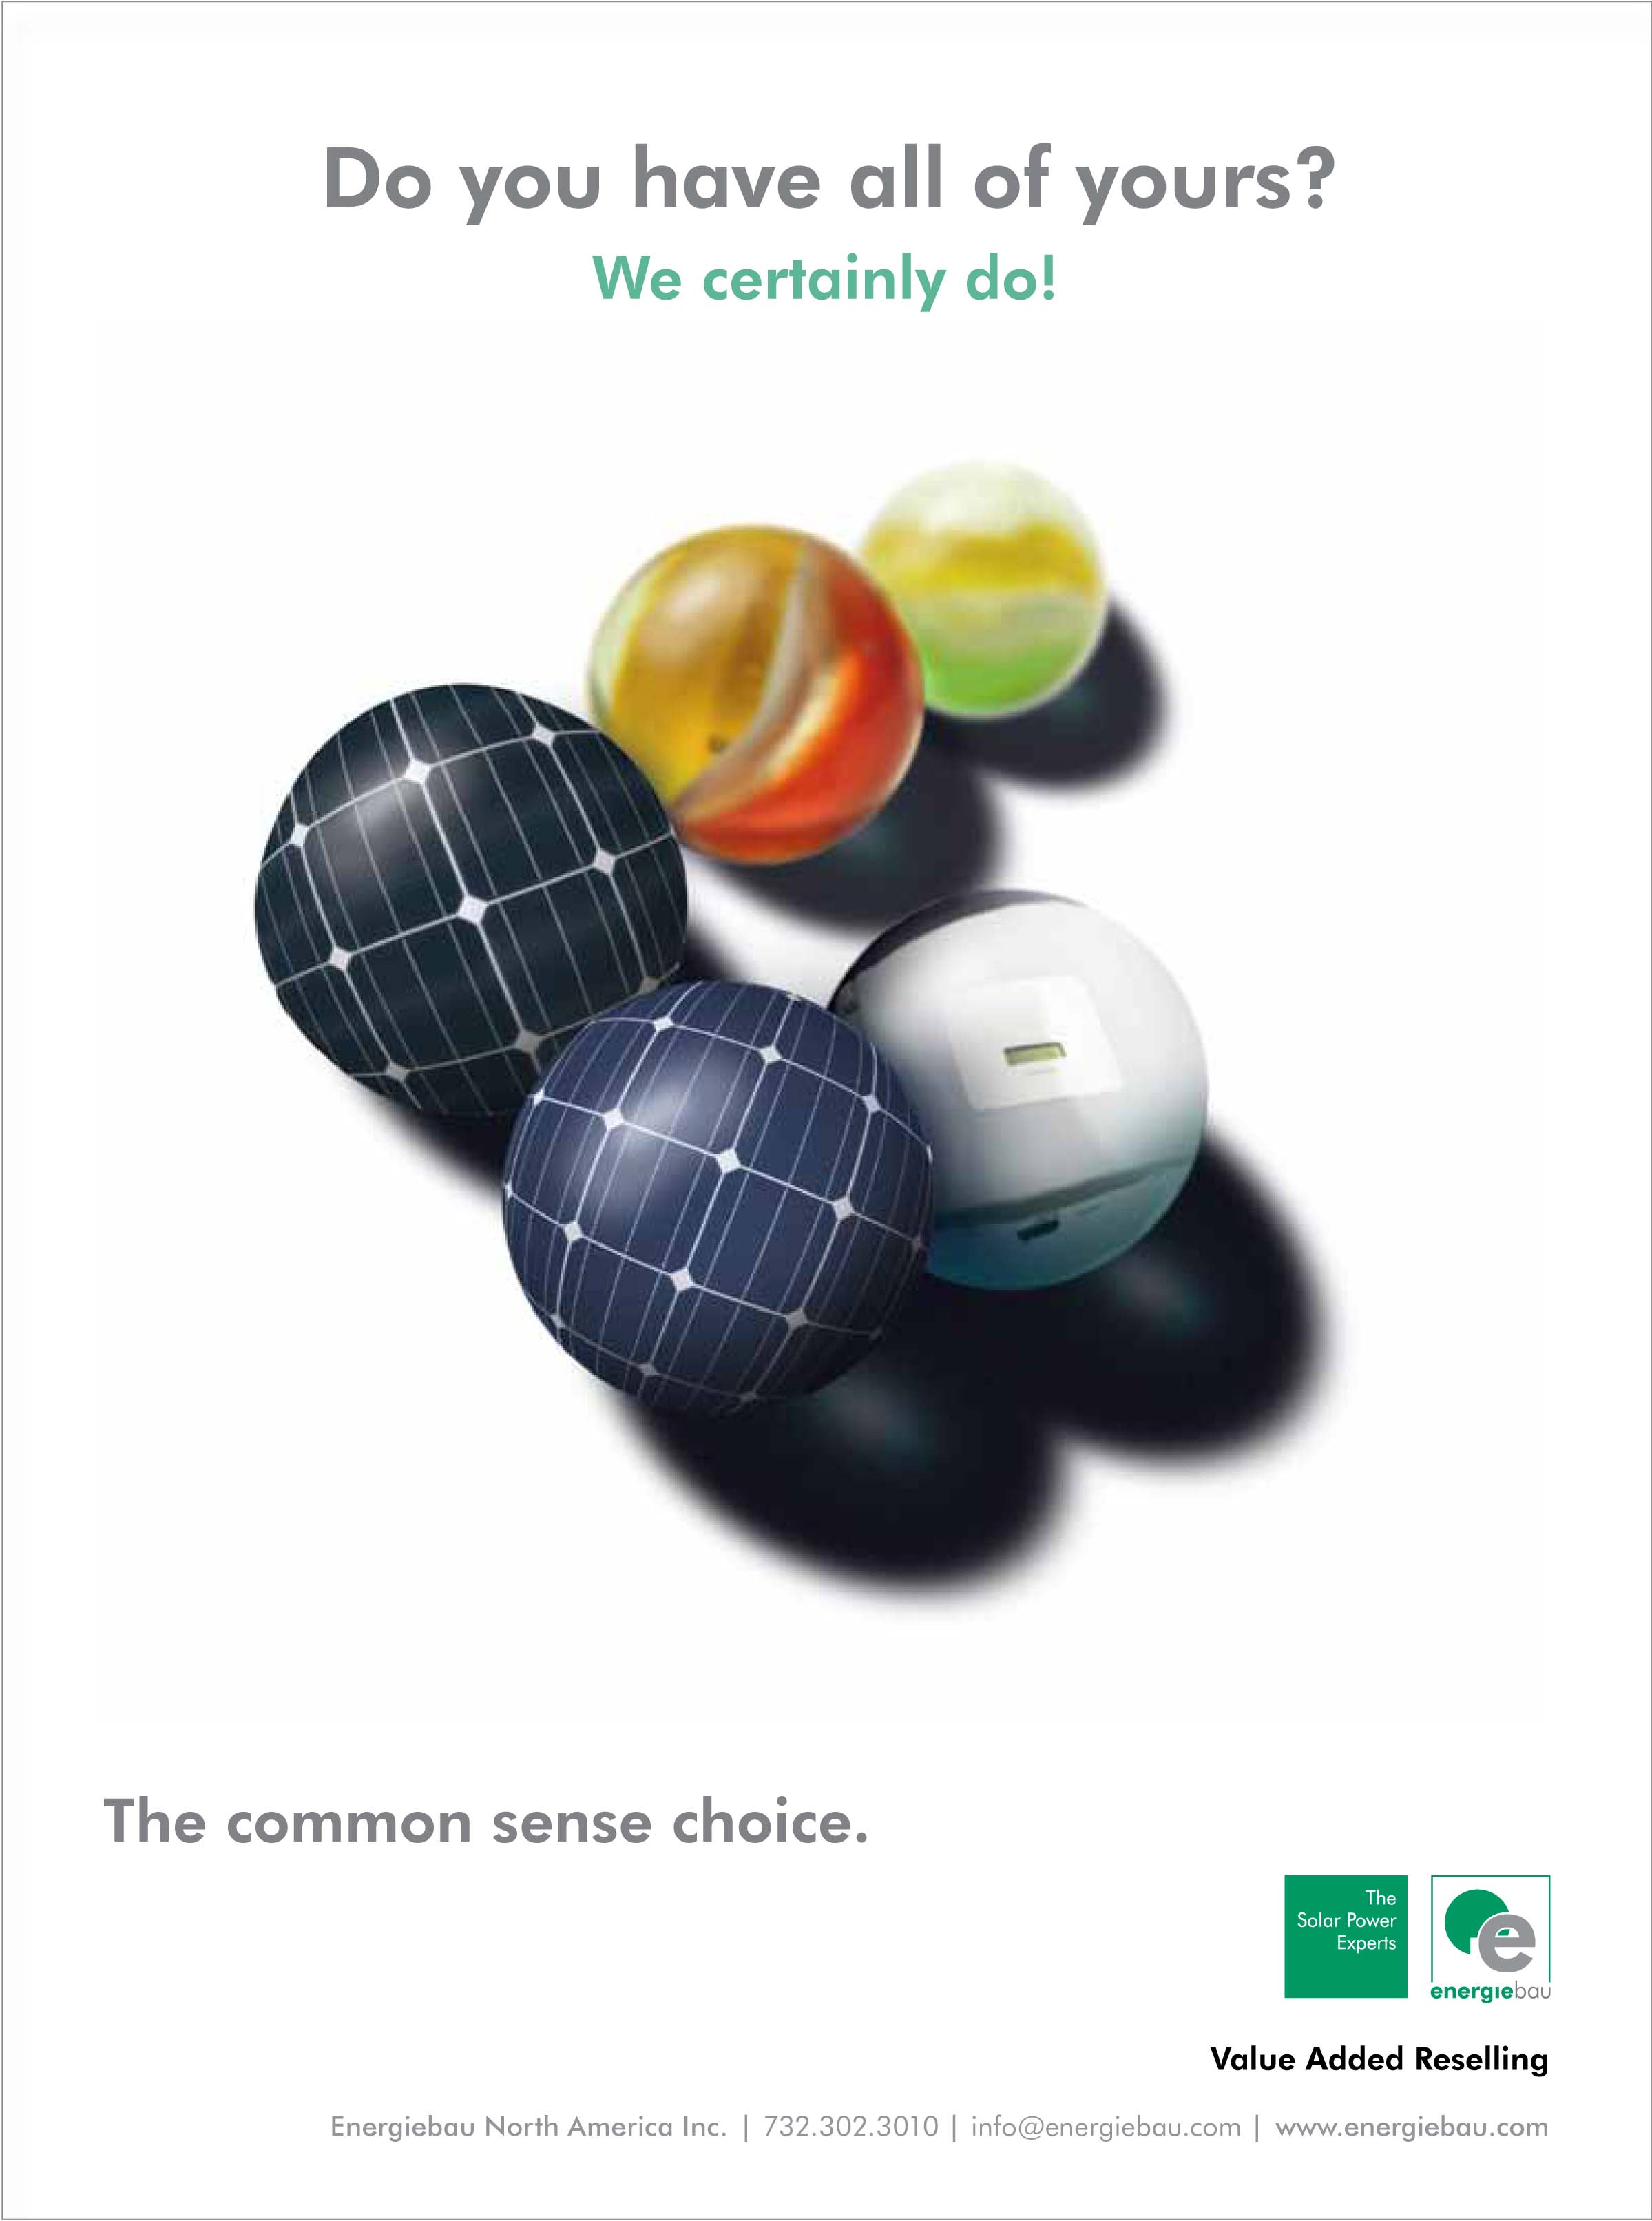 Energiebau North America “Do you have all of yours?” Ad